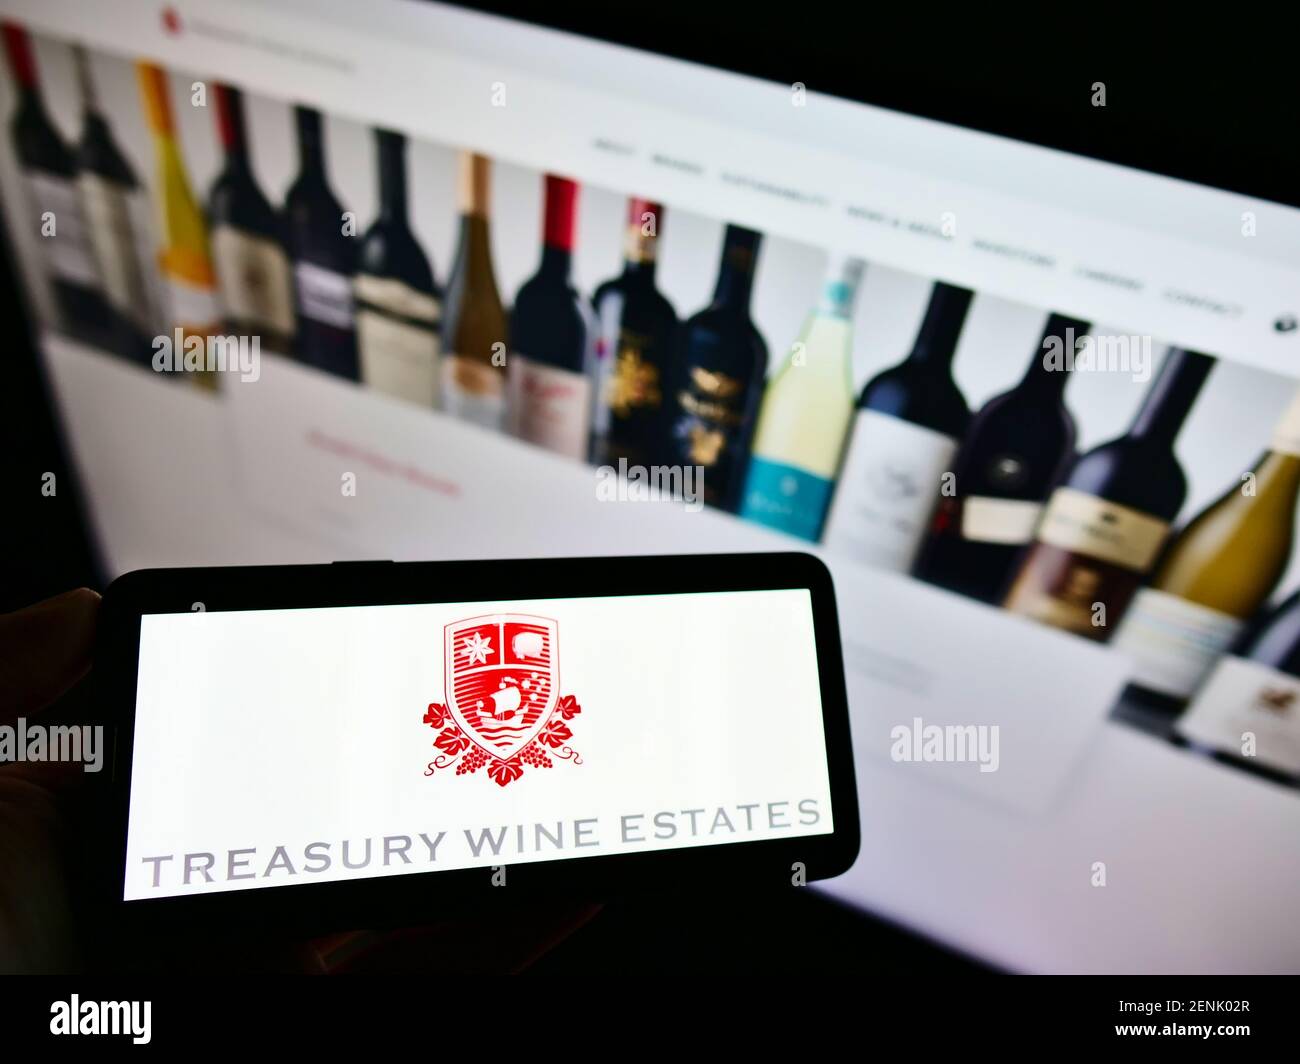 Person holding mobile phone with business logo of Australian winemaking company Treasury Wine Estates on screen with website. Focus on phone display. Stock Photo